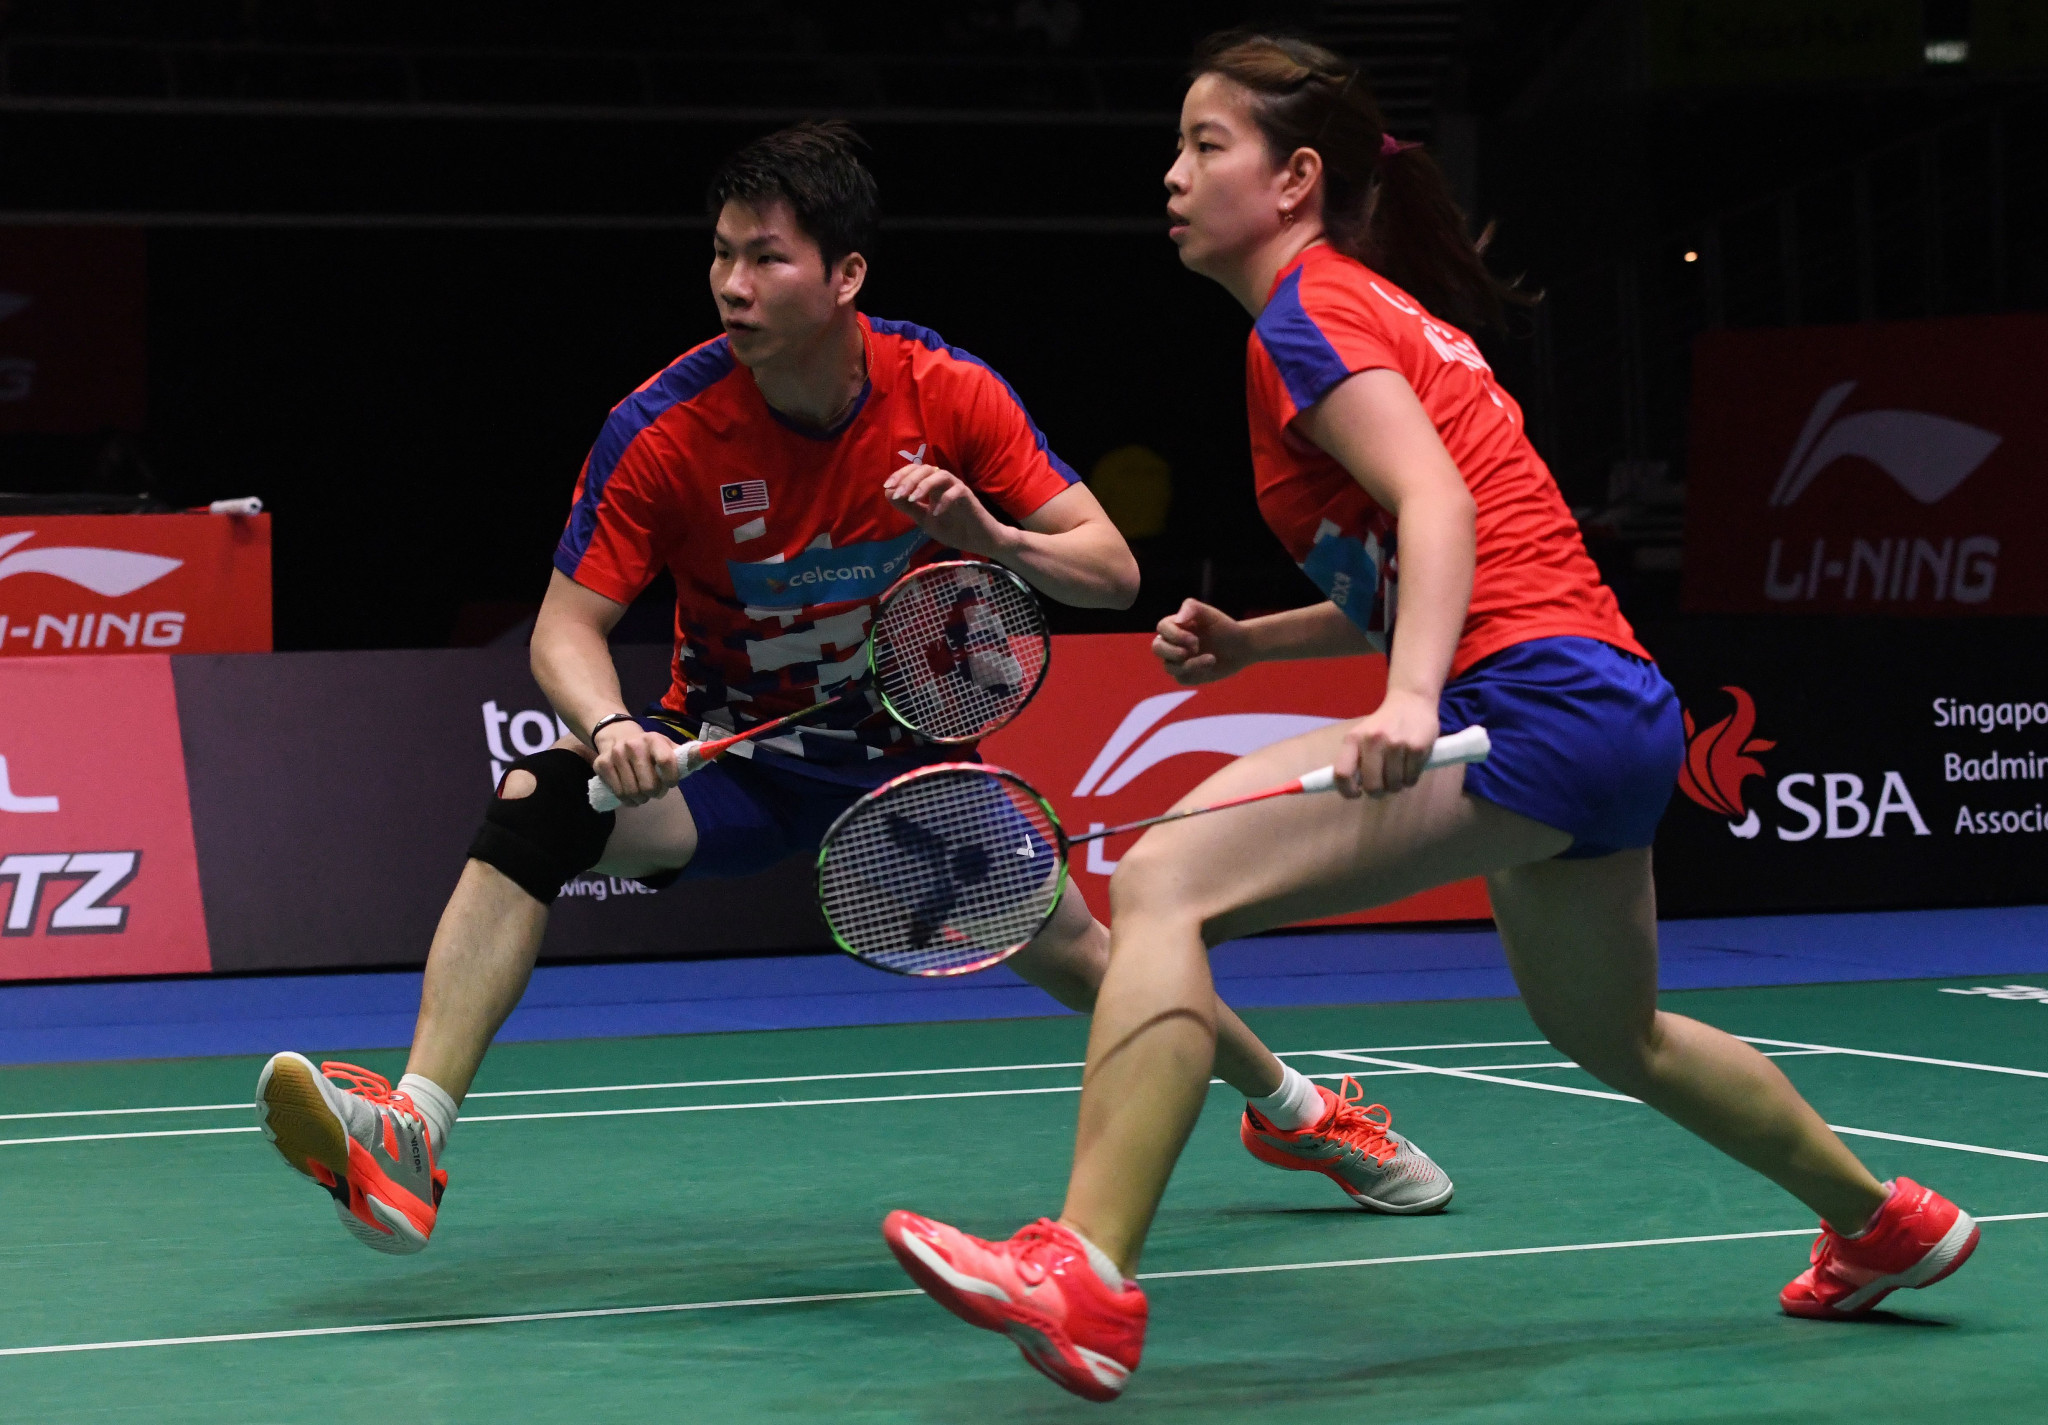 Malaysian badminton players Goh Soon Huat, left, and Shevon Jemie Lai, right, have announced their engagement ©Getty Images